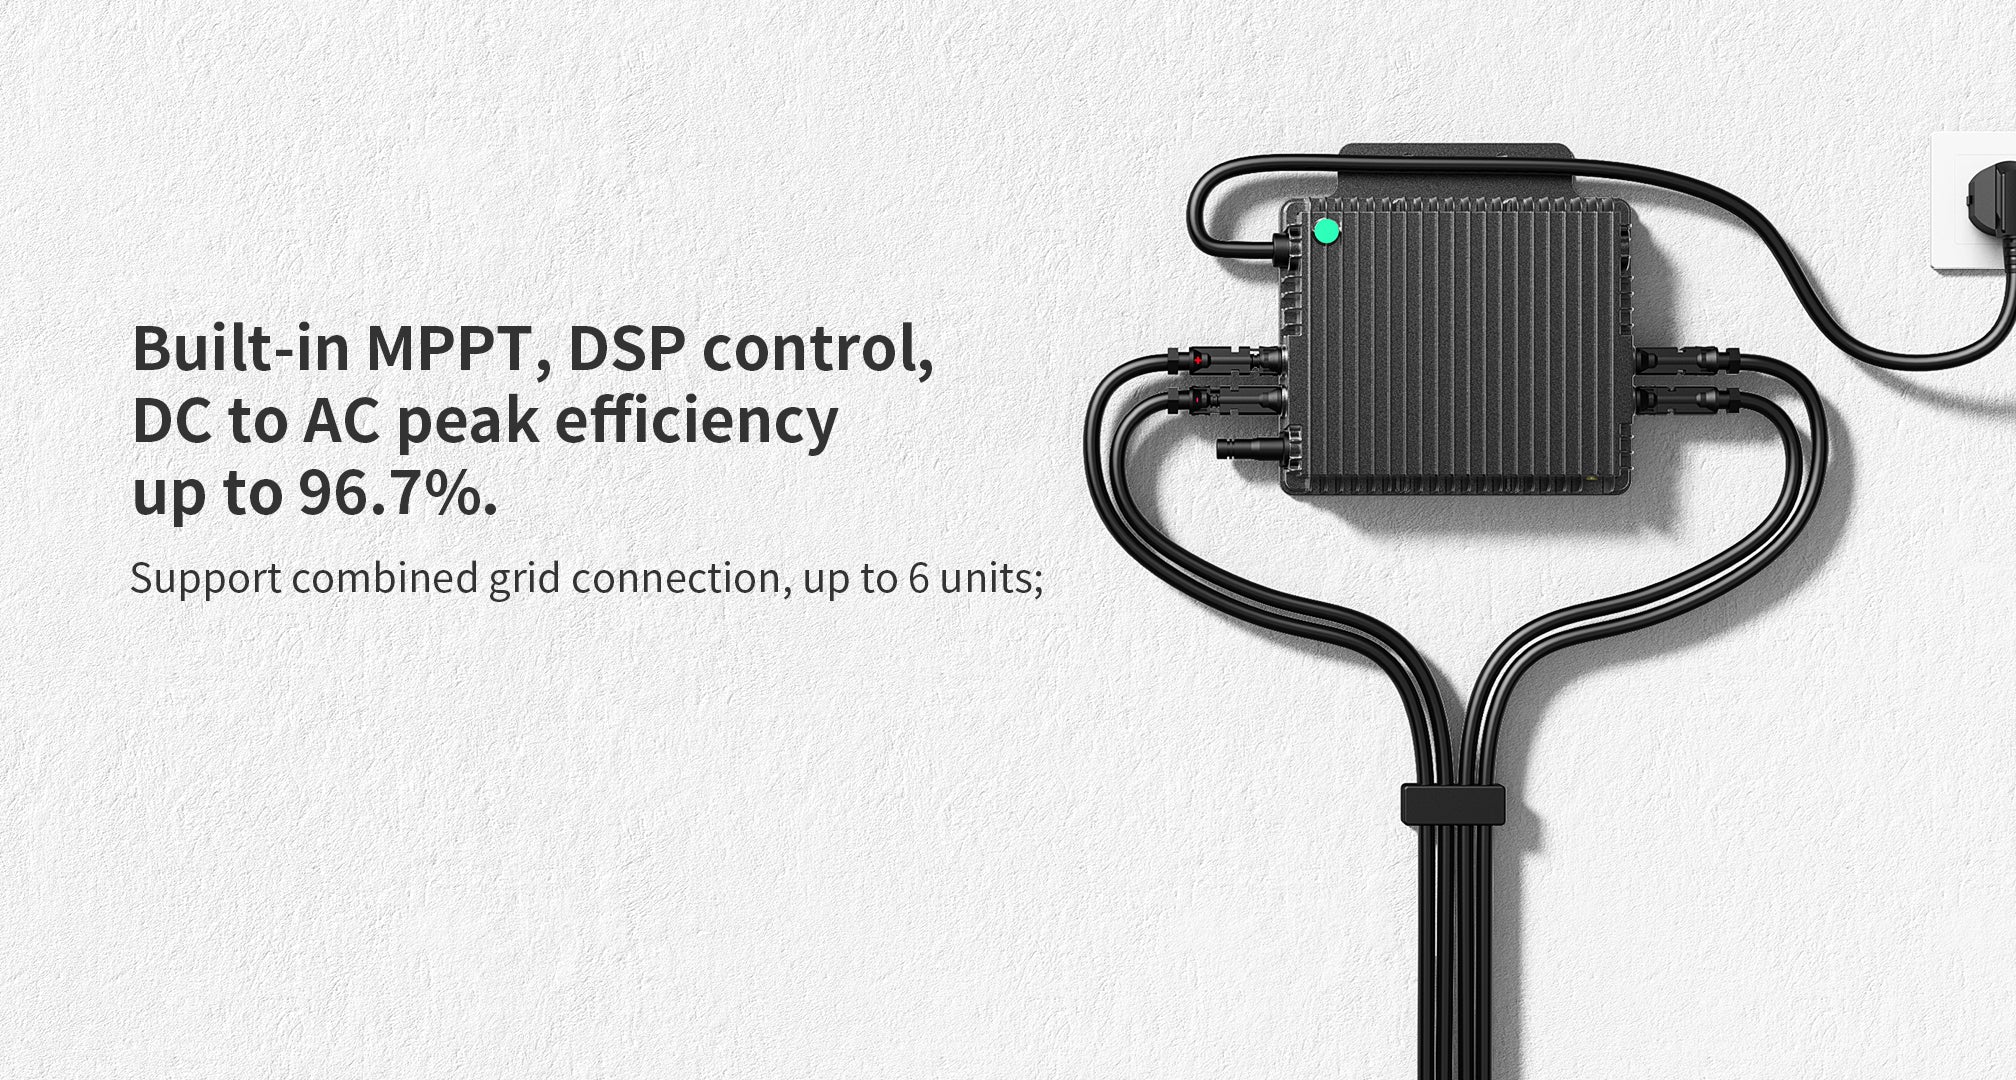 Built-in MPPT, DSP control, DC to AC peak efficiency up to 96.7%. Support combined grid connection, up to 6 units;